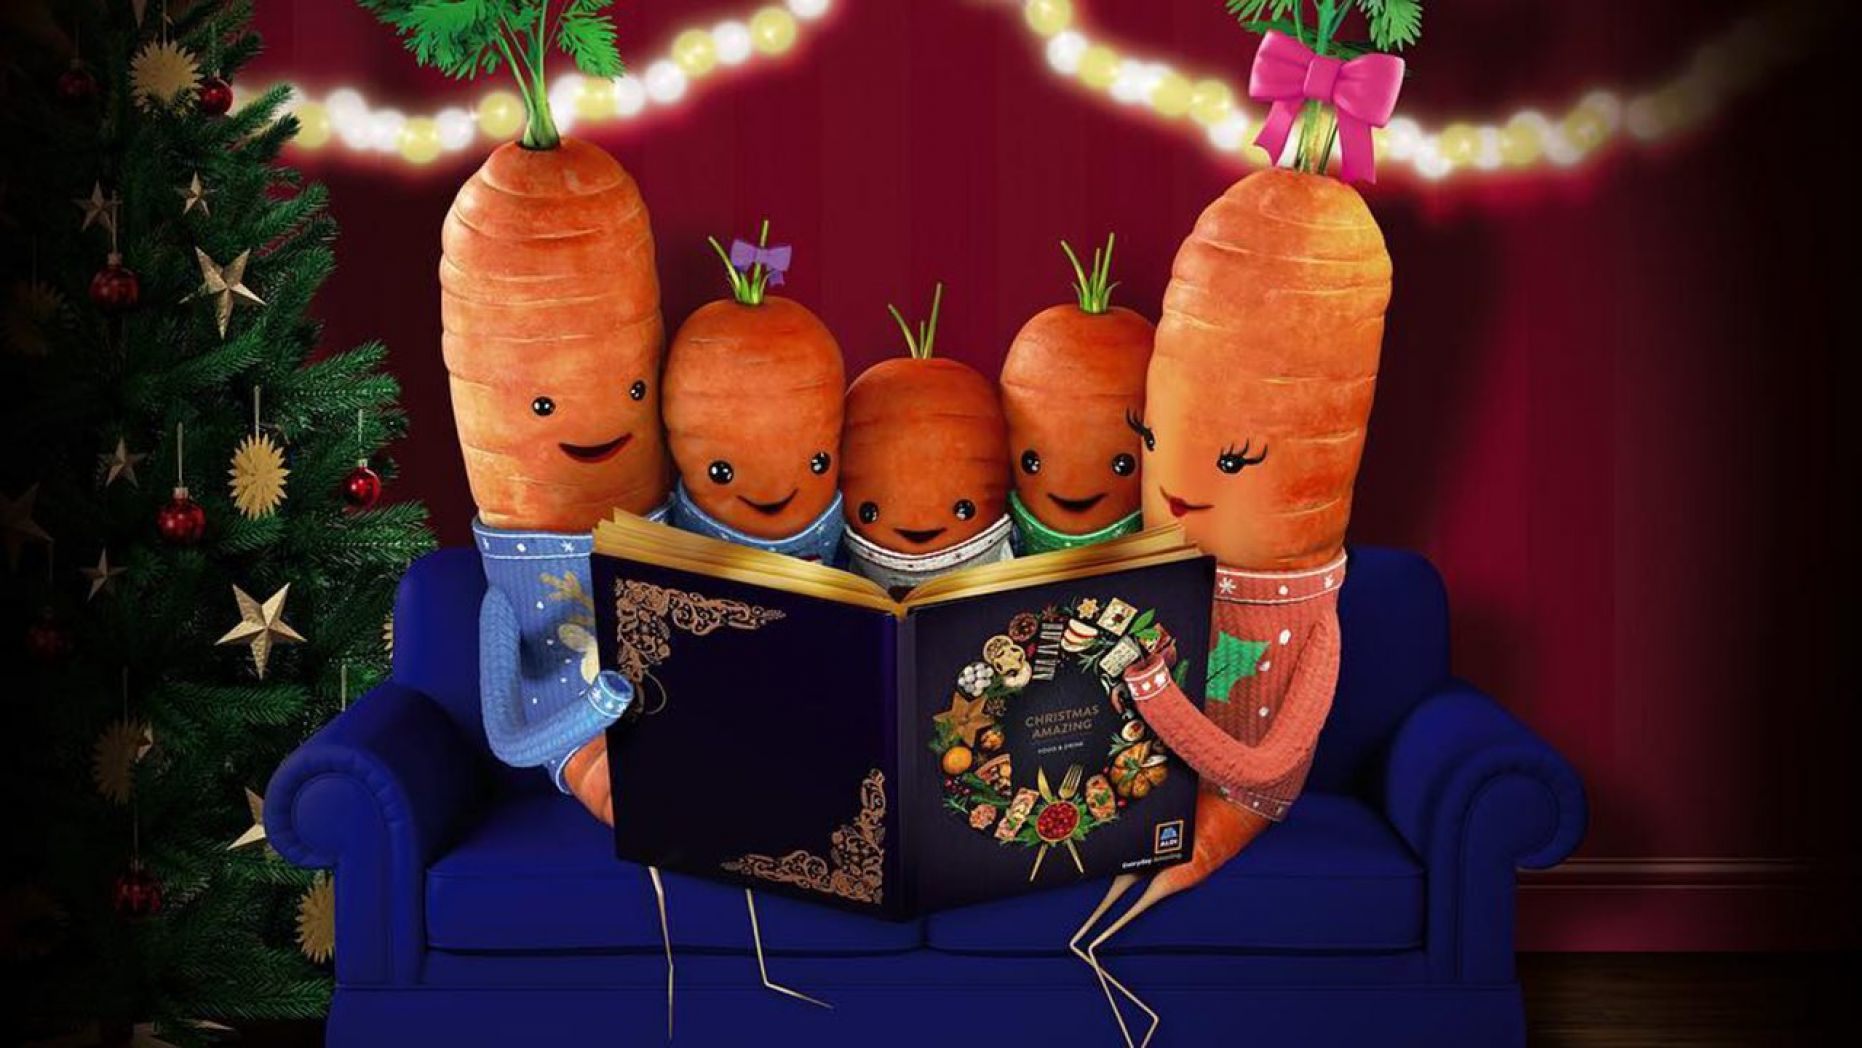 Aldi's "Kevin the Carrot" Mascot Toy On Holiday Wish Lists This Season